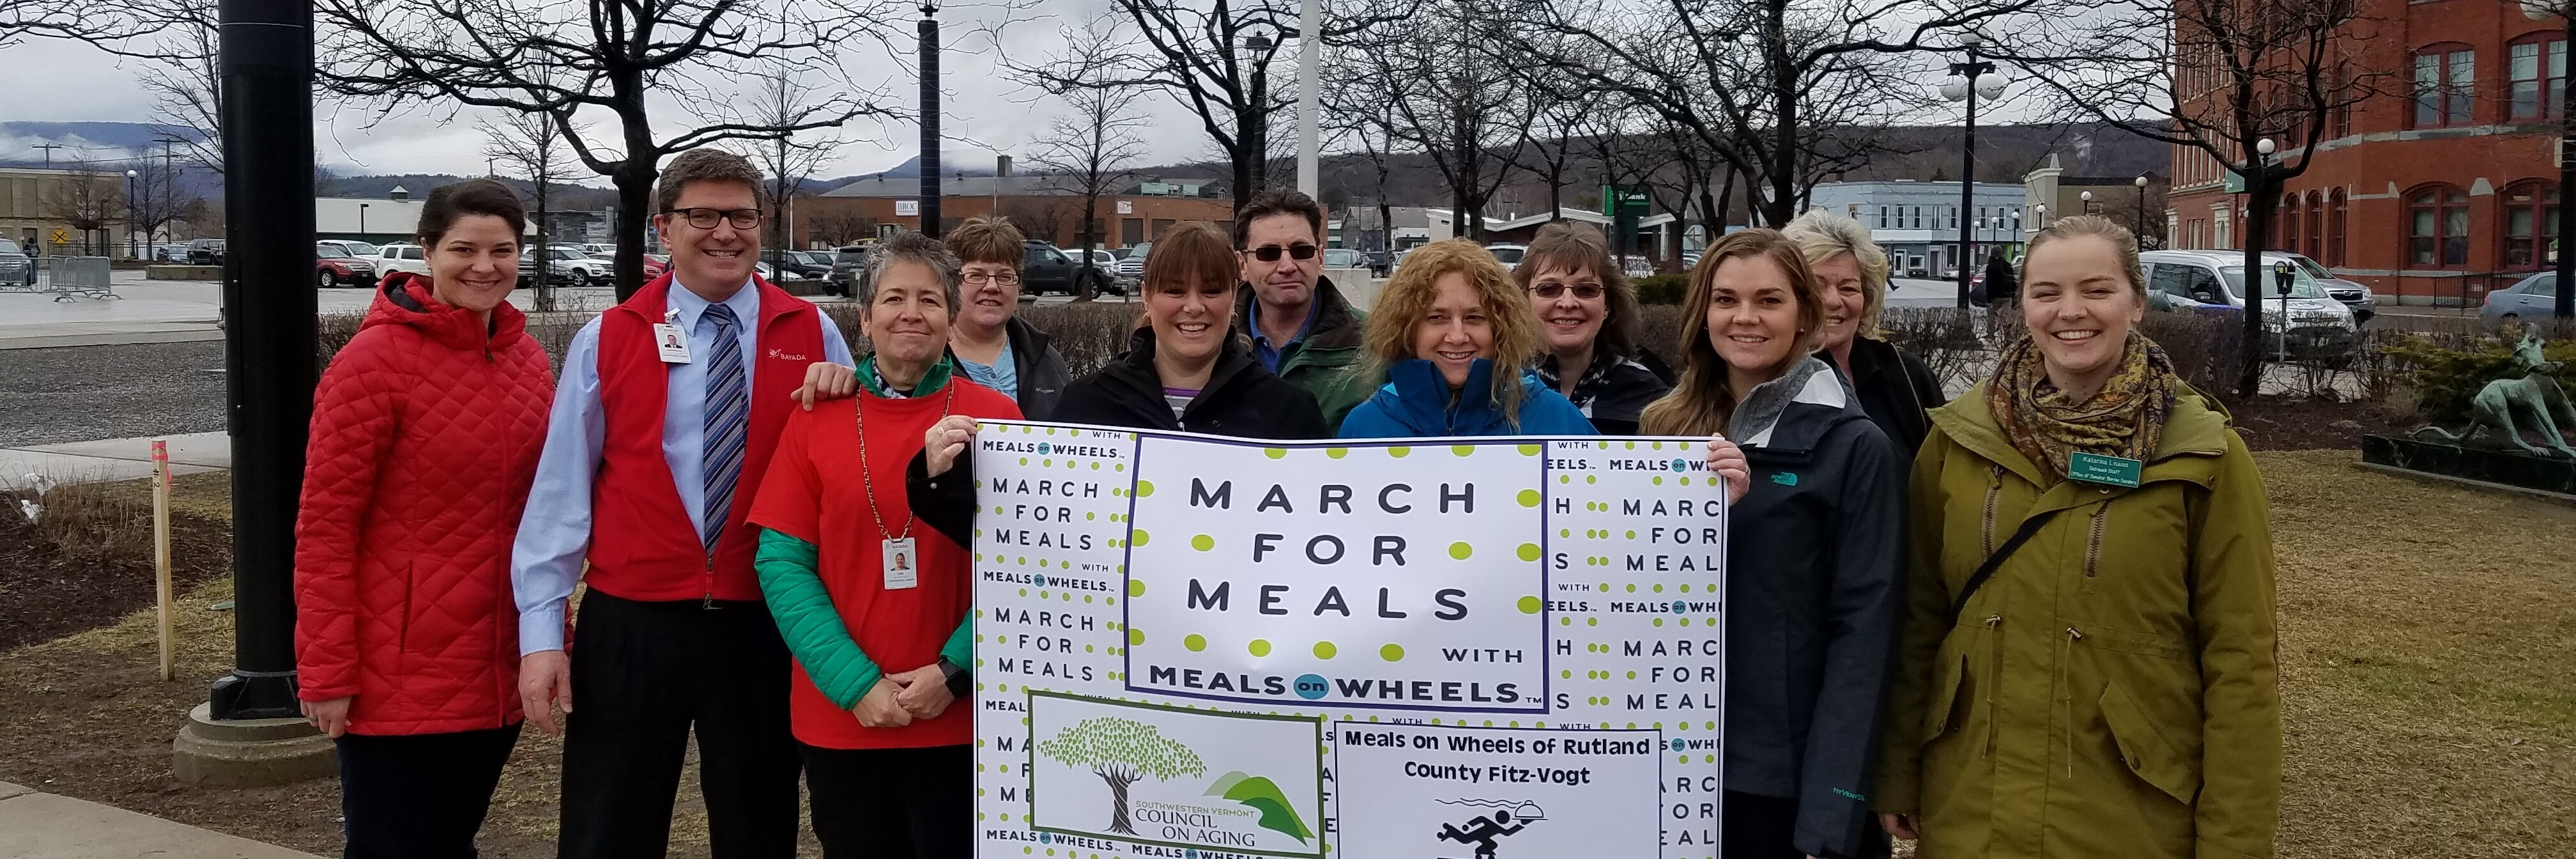 group smiling with march for meals on wheels sign